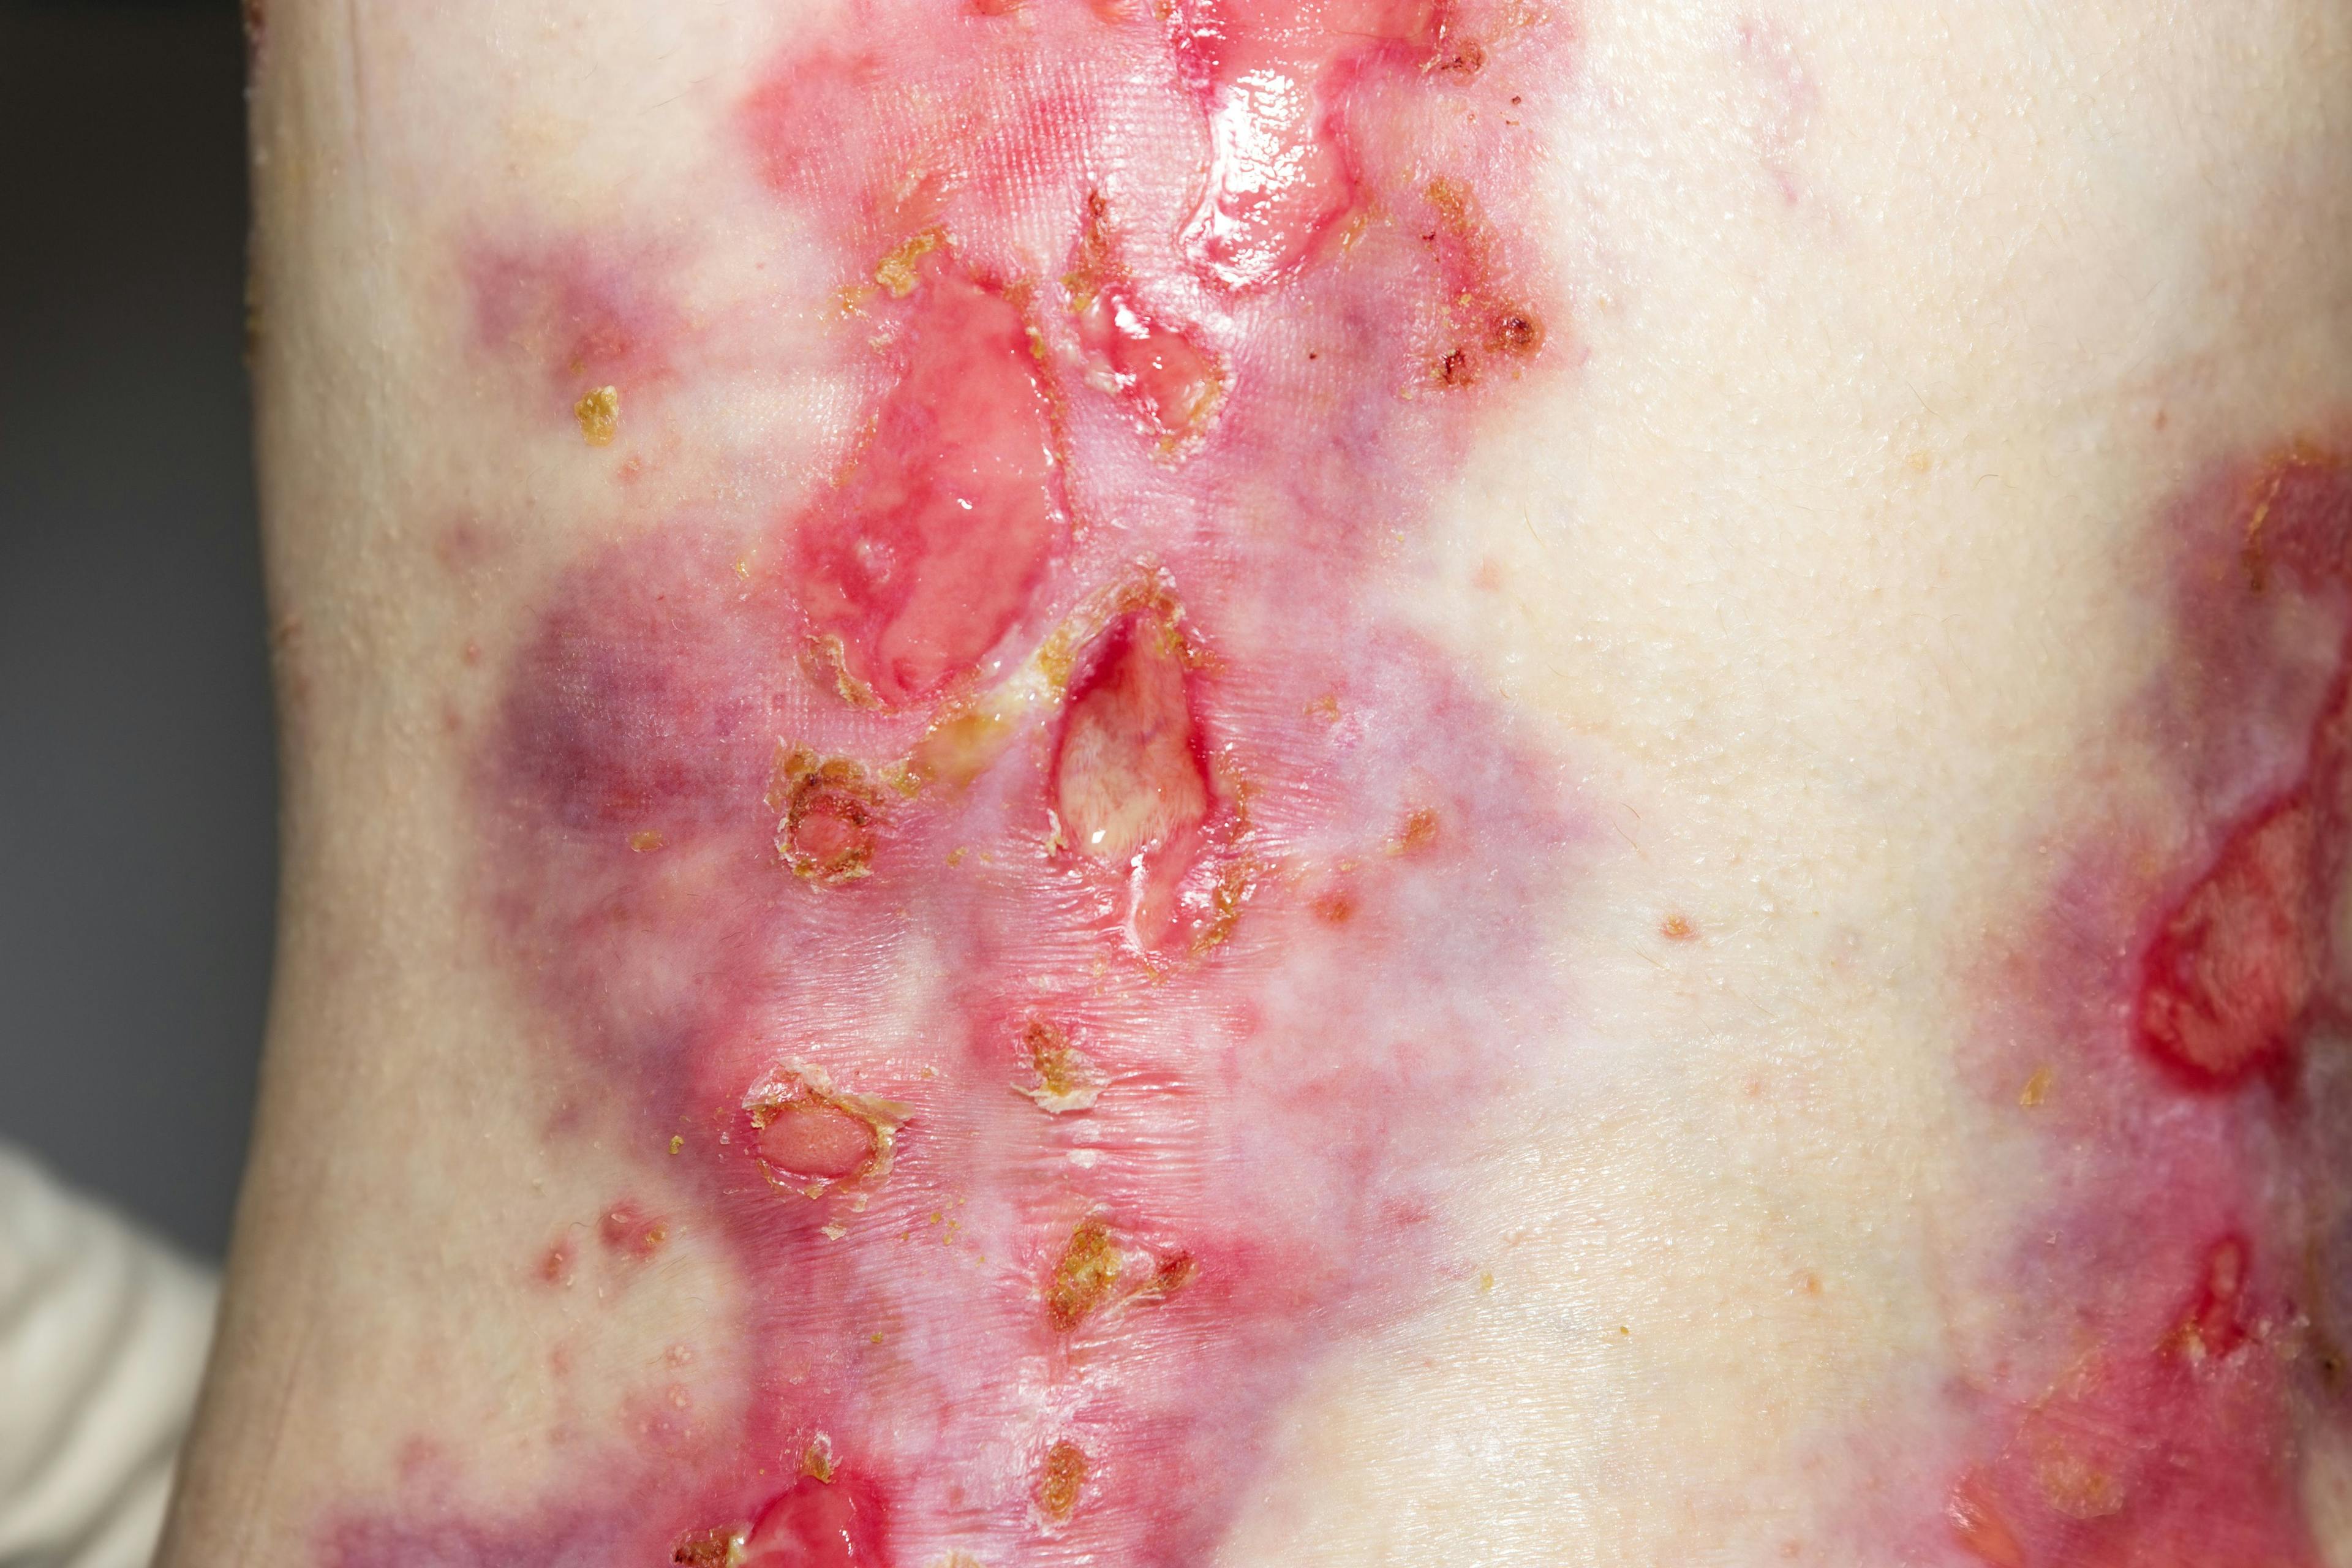 FDA Approves Topical for Rare Skin Disorder